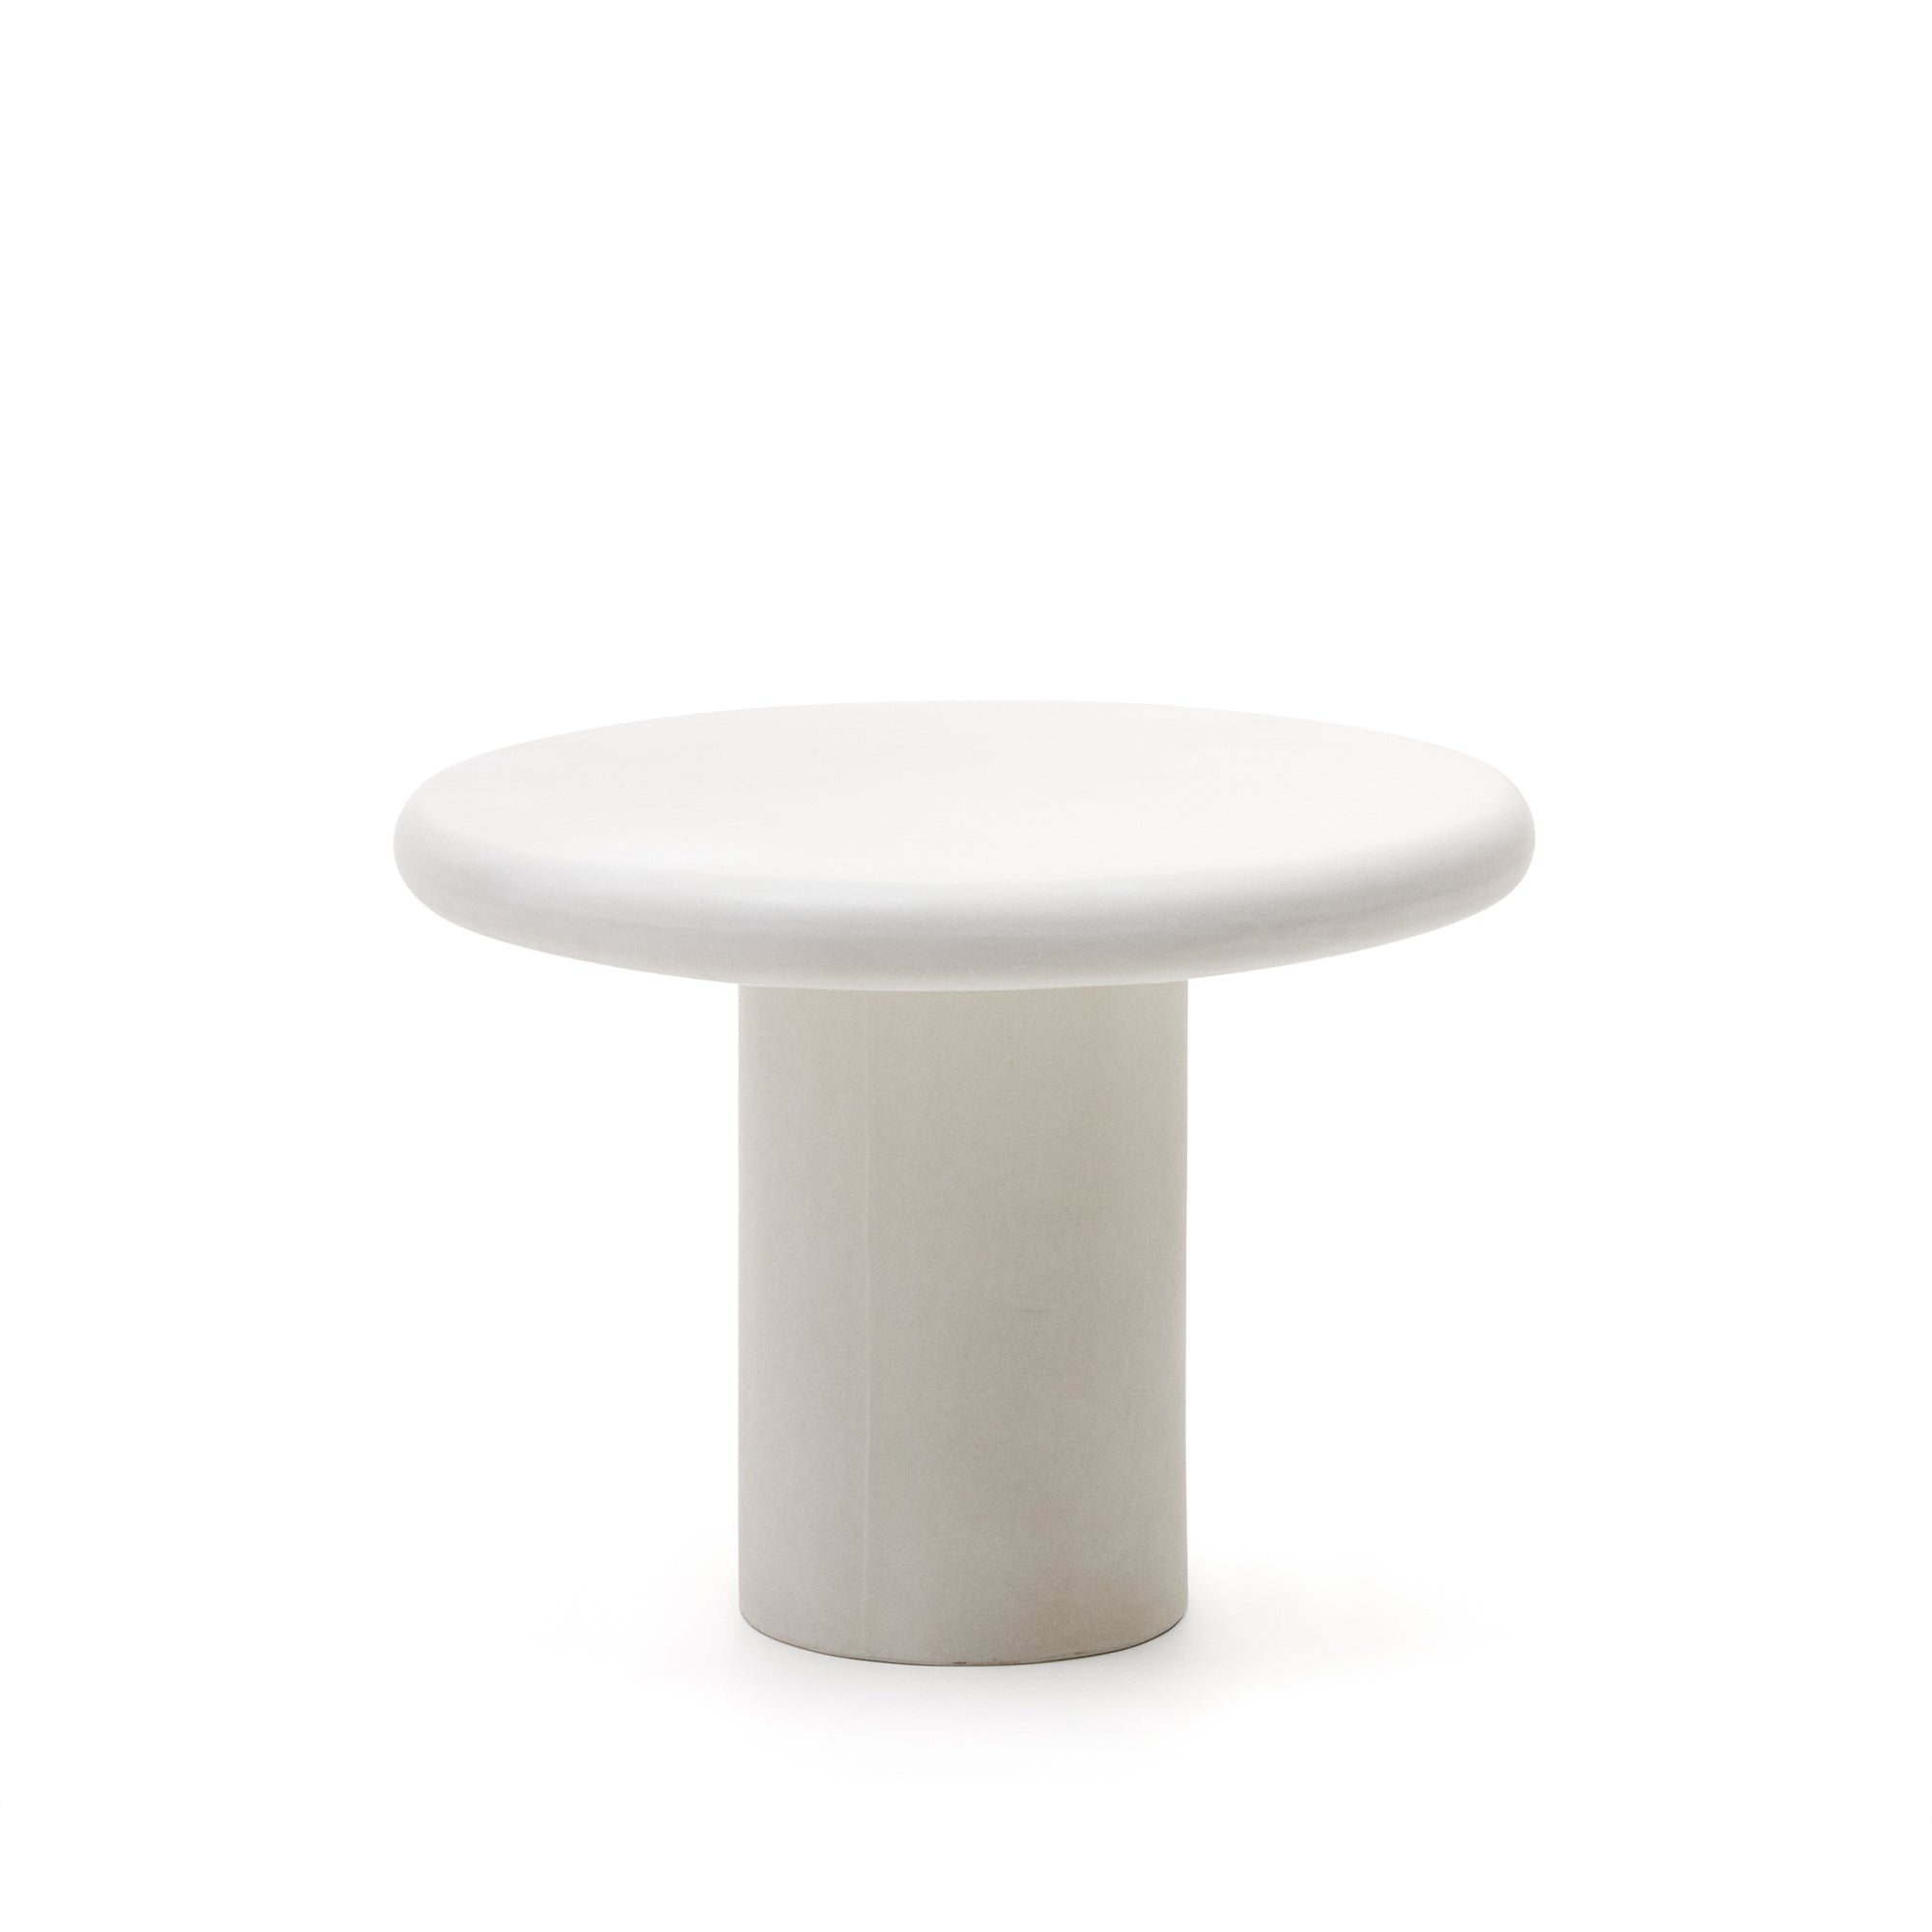 Addaia round table made of white cement Ø90 cm